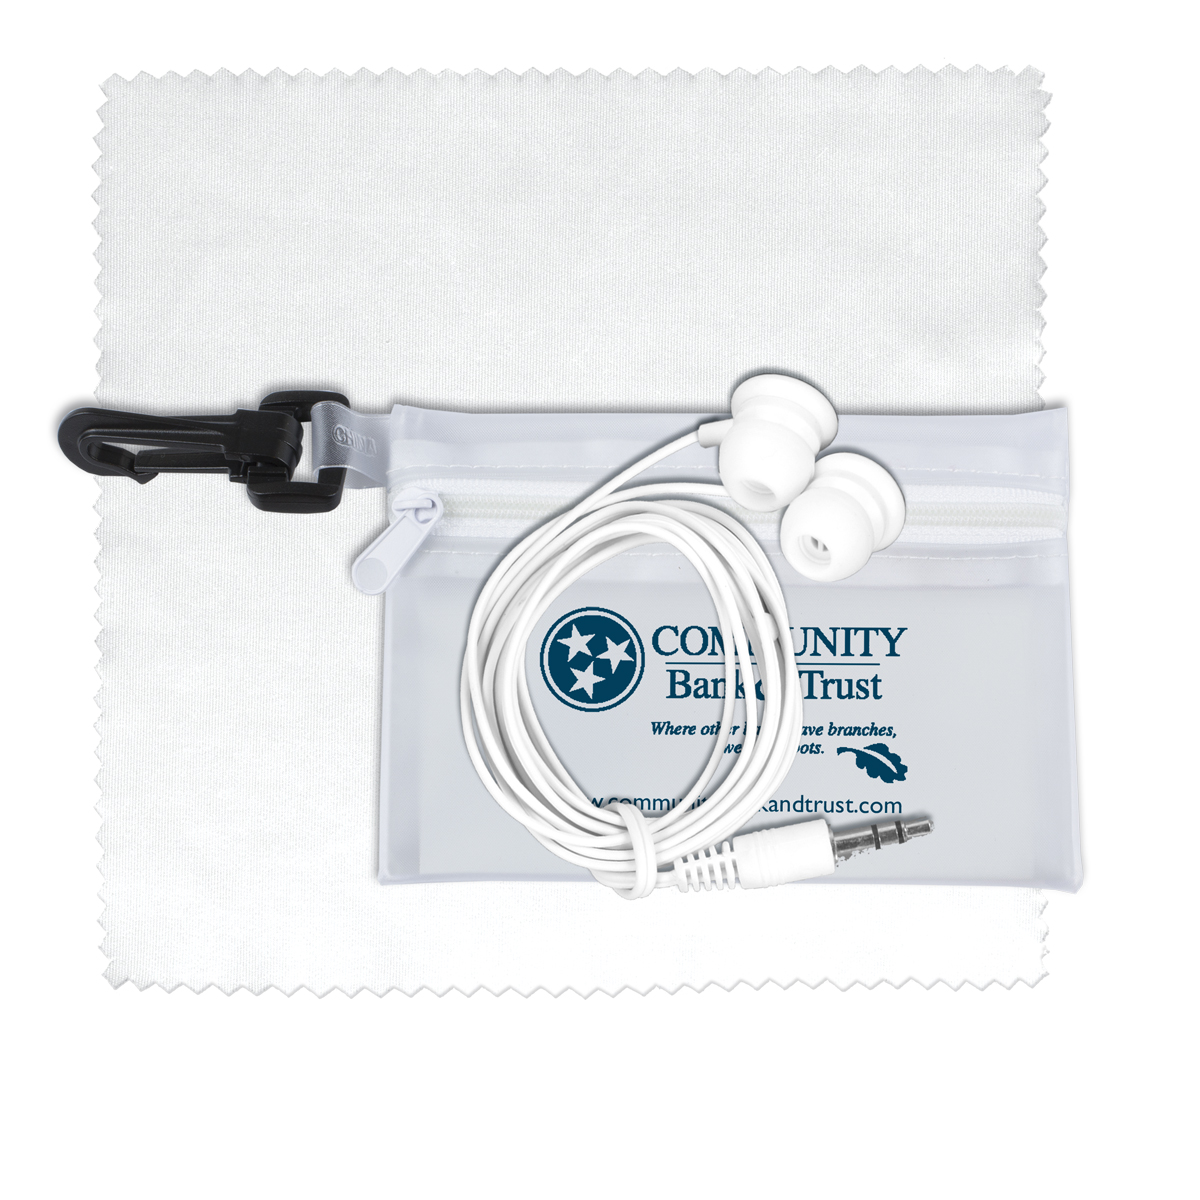 Earbud Tech Kit with Microfiber Cleaning Cloth In Translucent Carabiner Zipper Pouch